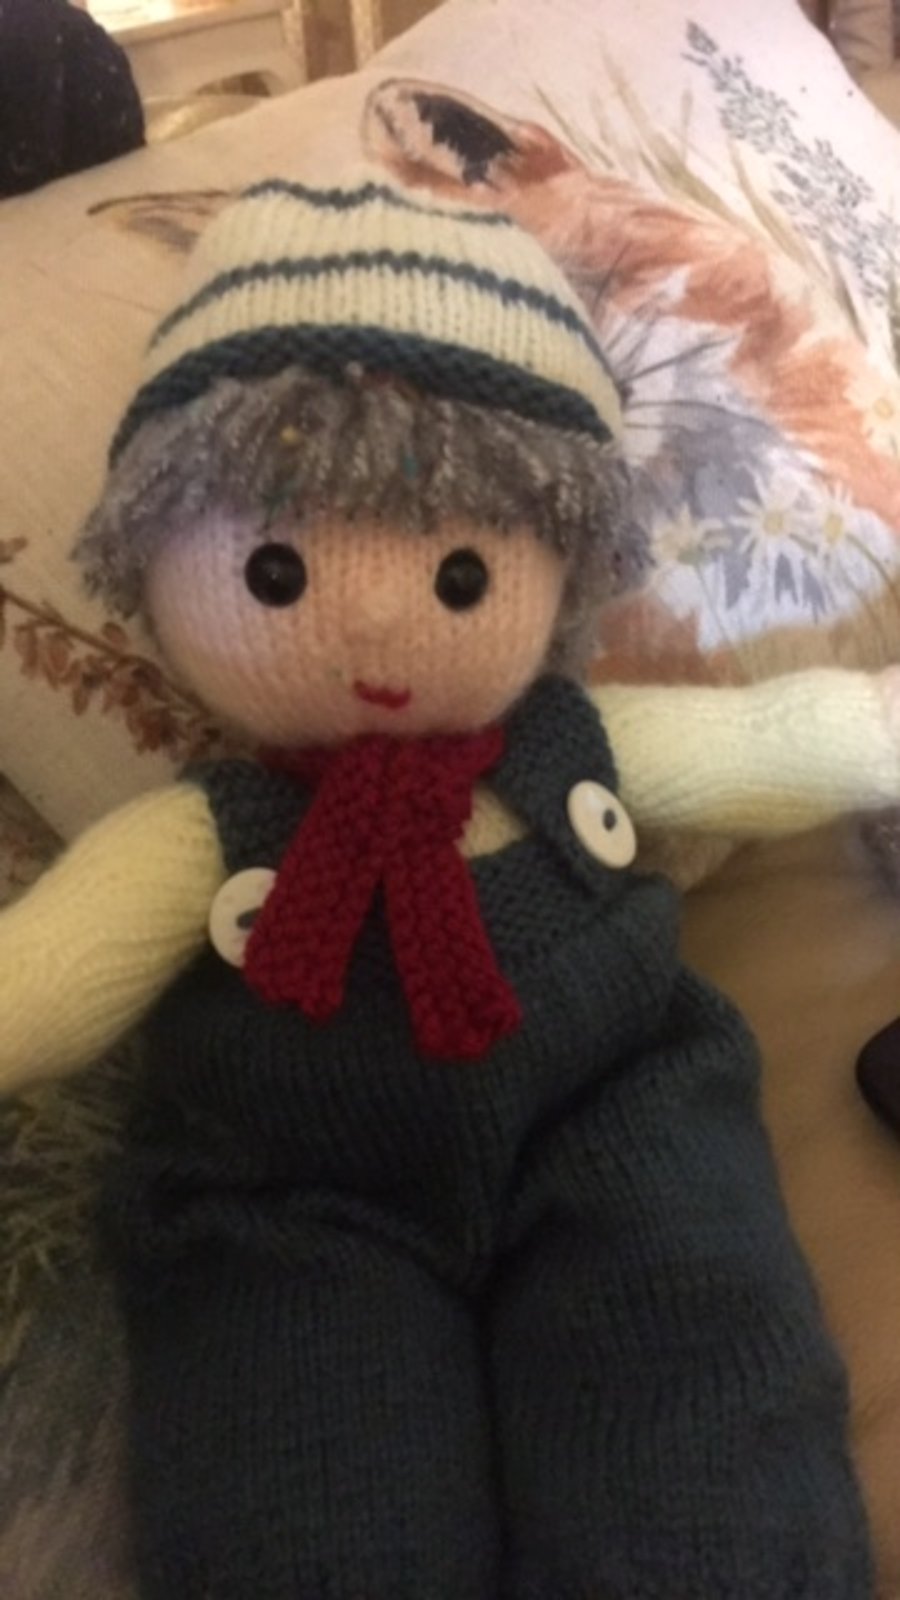 Hand Knitted Poppet Doll - Dylan